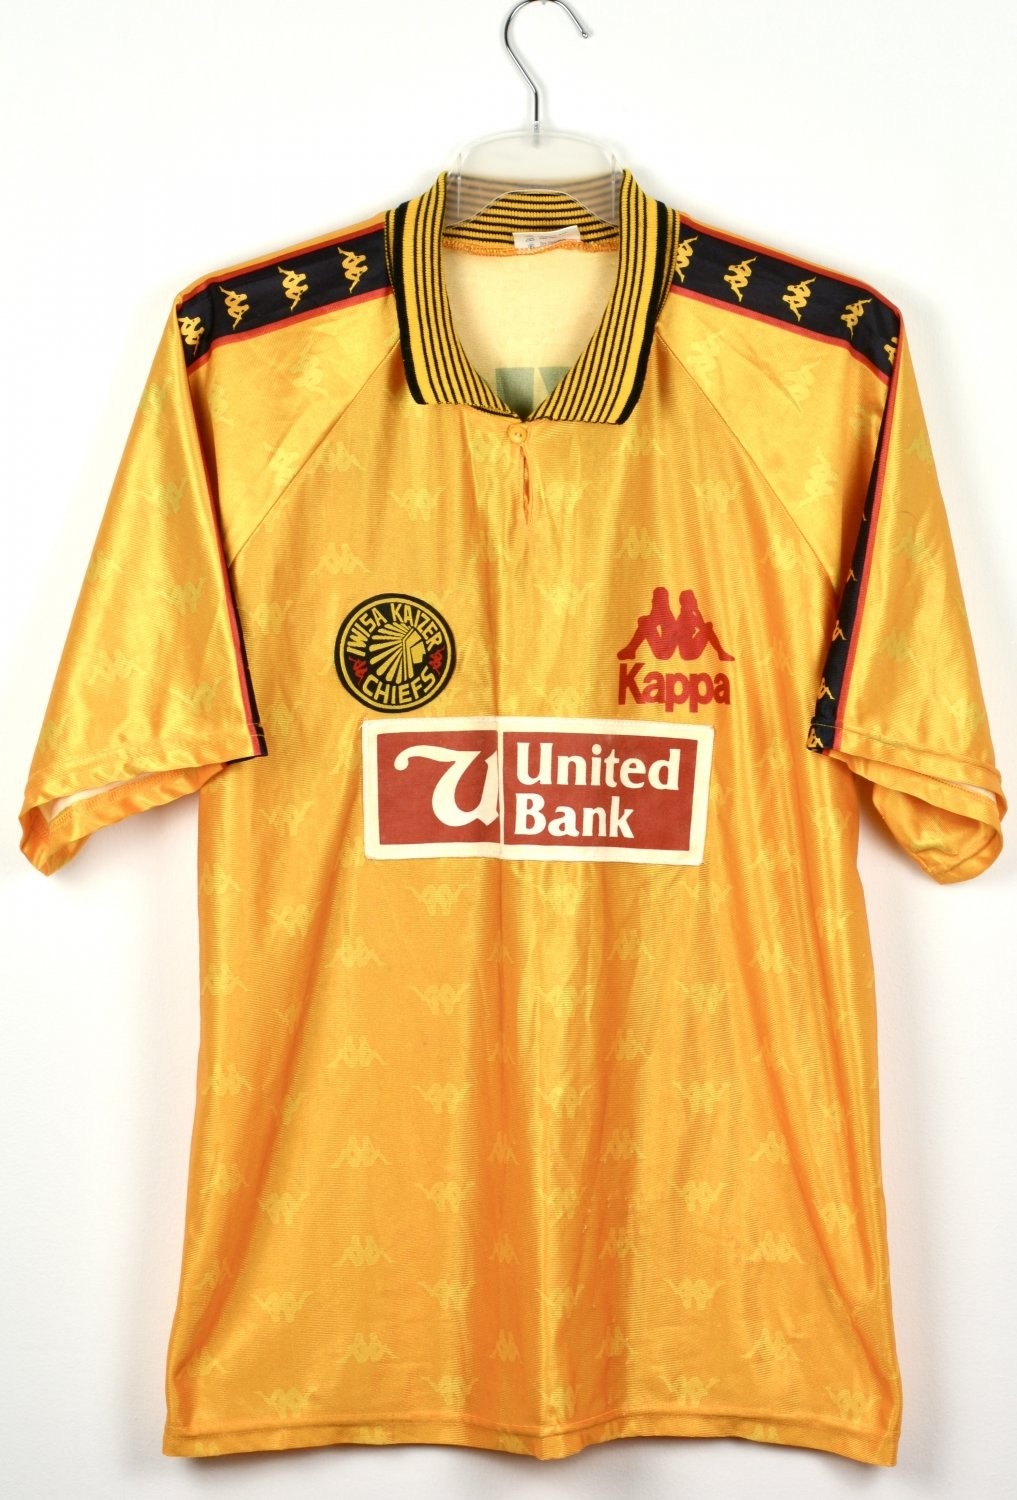 Images courtesy of Football Kit Archive